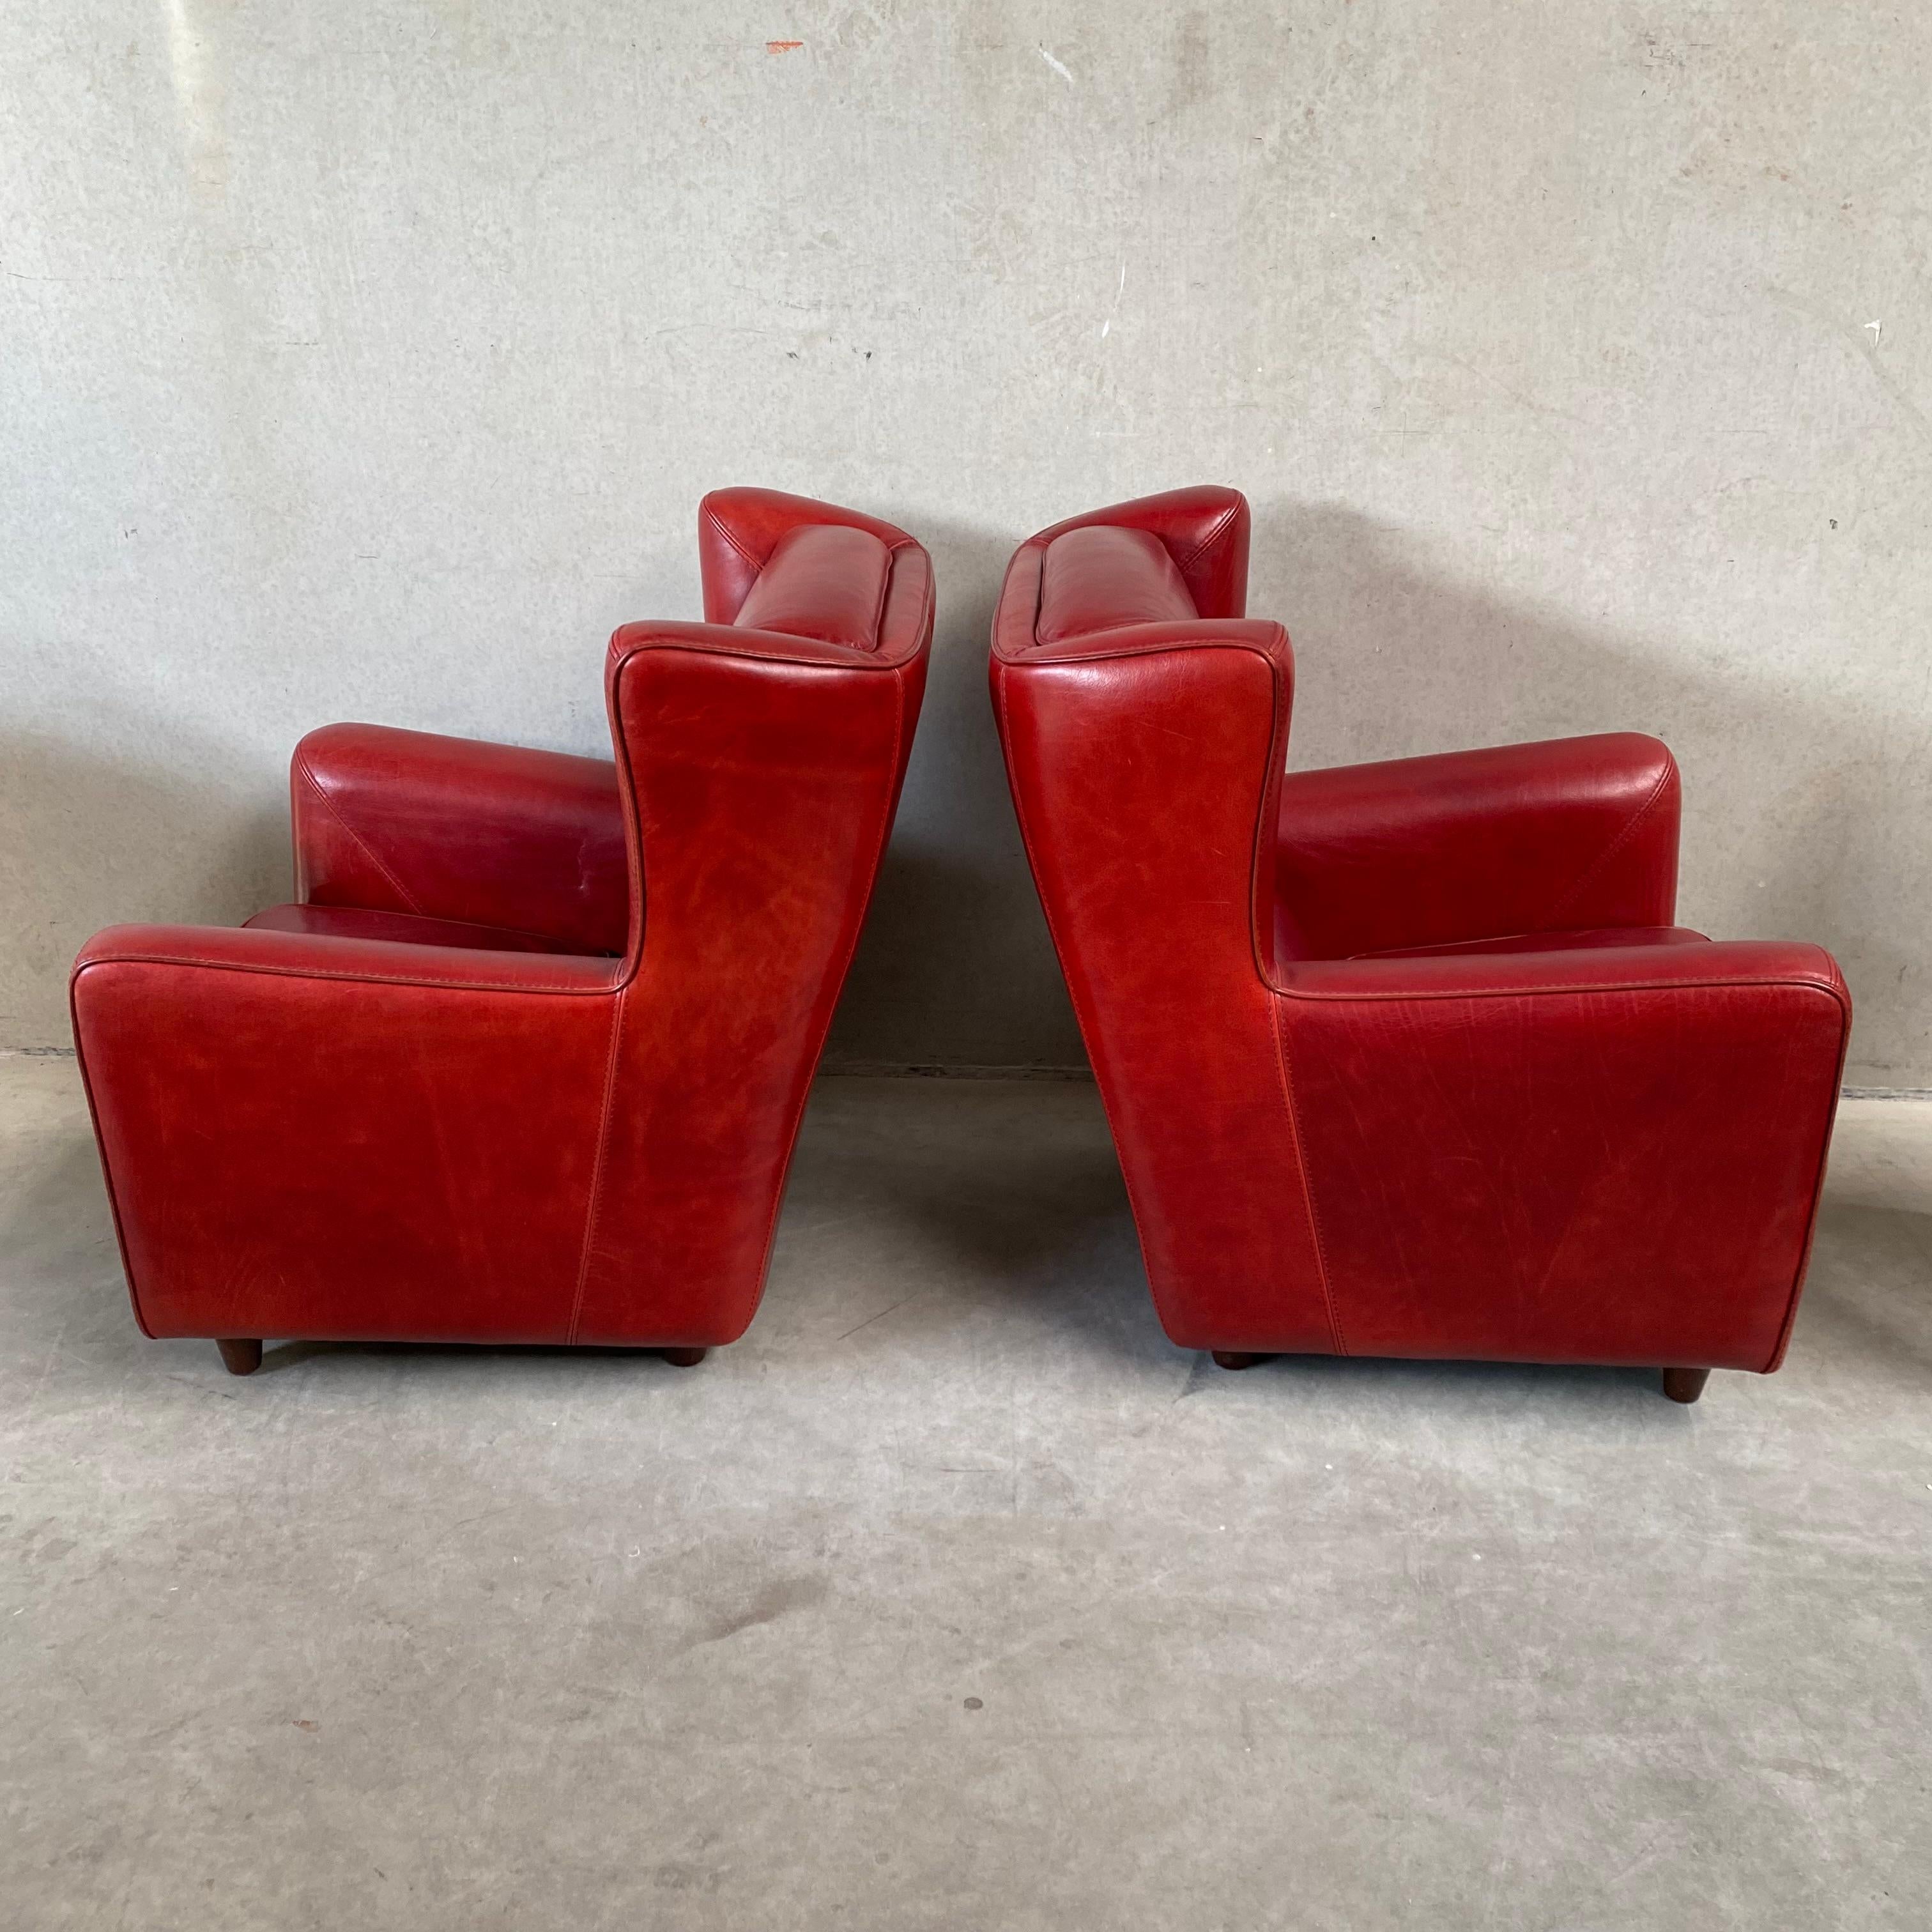 Pair of Ox-Blood Red Leather Lounge Chairs Begére by Baxter Italy 90s For Sale 5